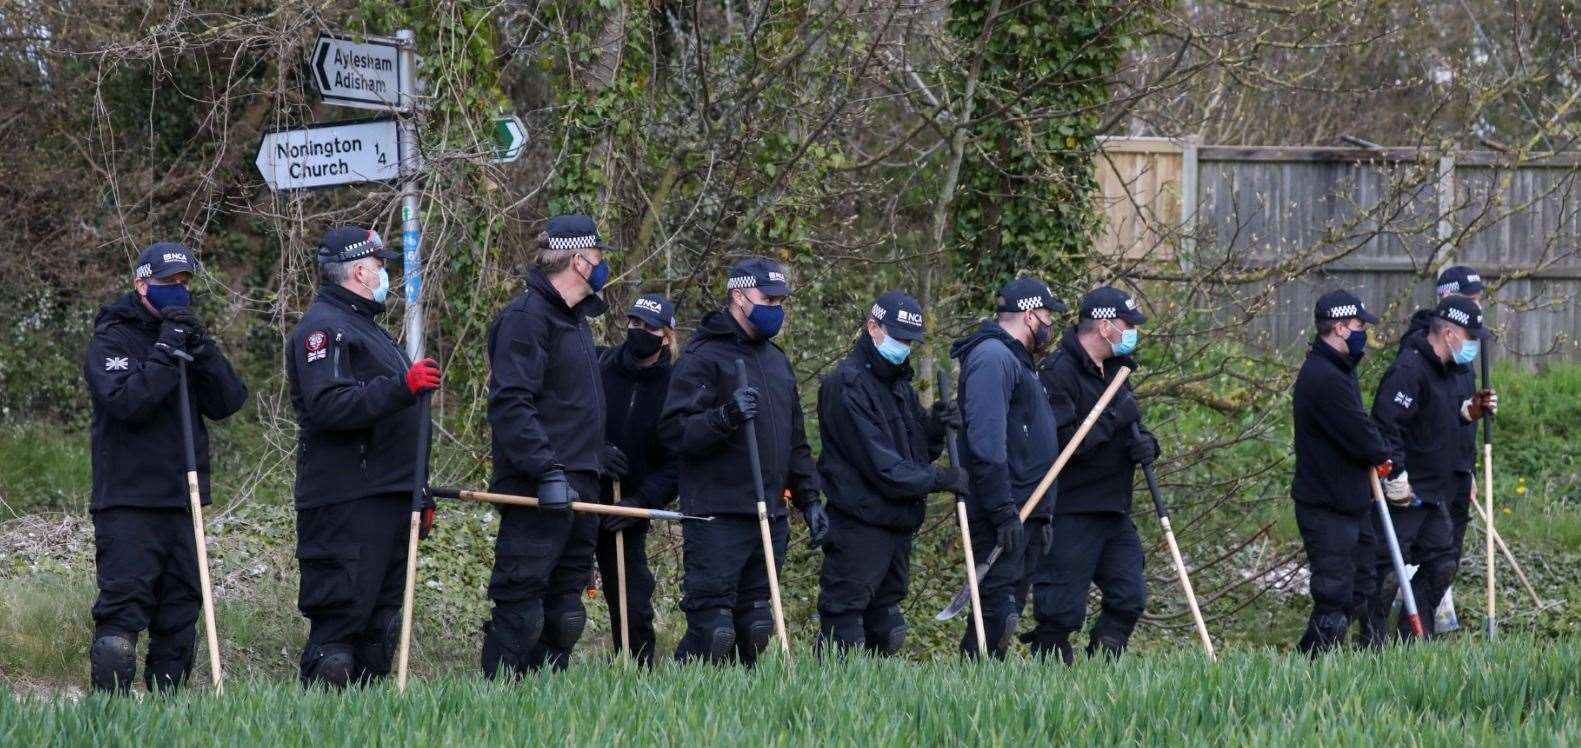 Police searching for clues in the hunt for the killer of Julia James. Picture UKNIP